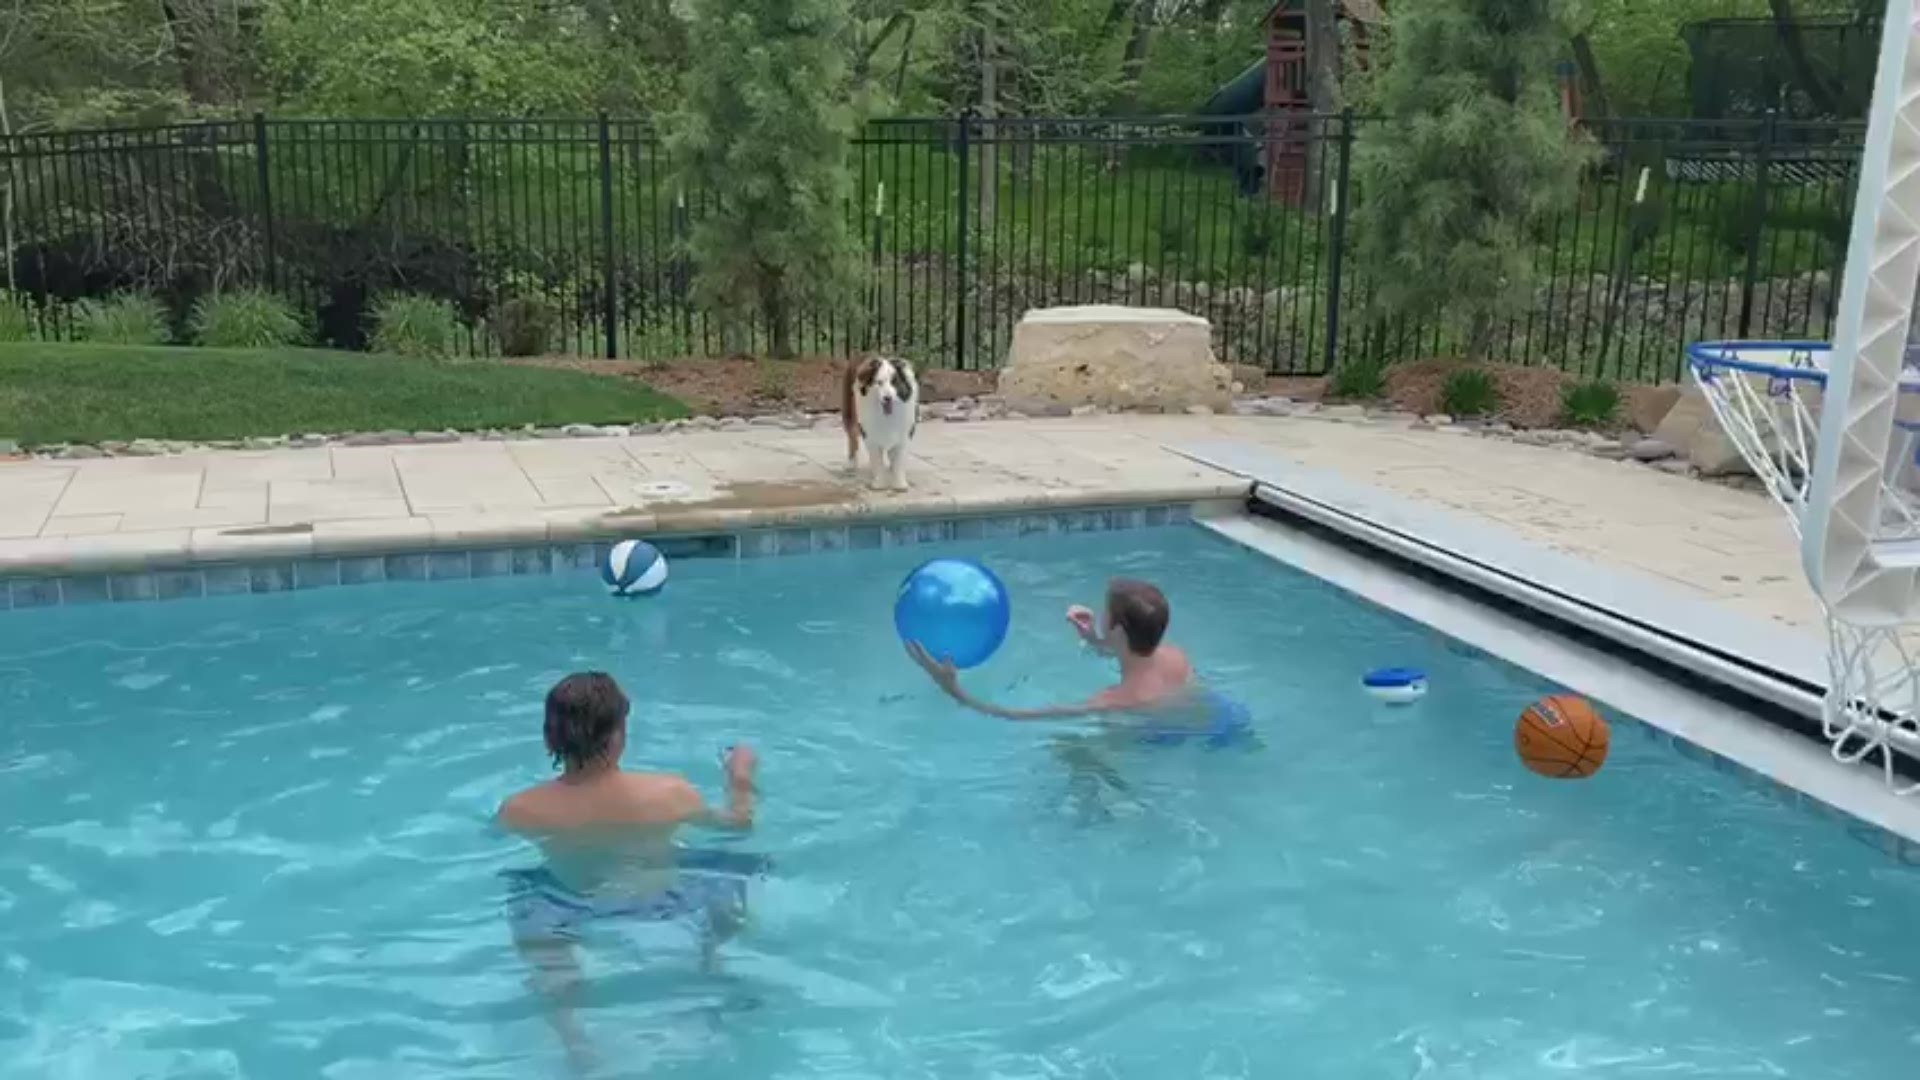 Dog plays catch with her beach ball